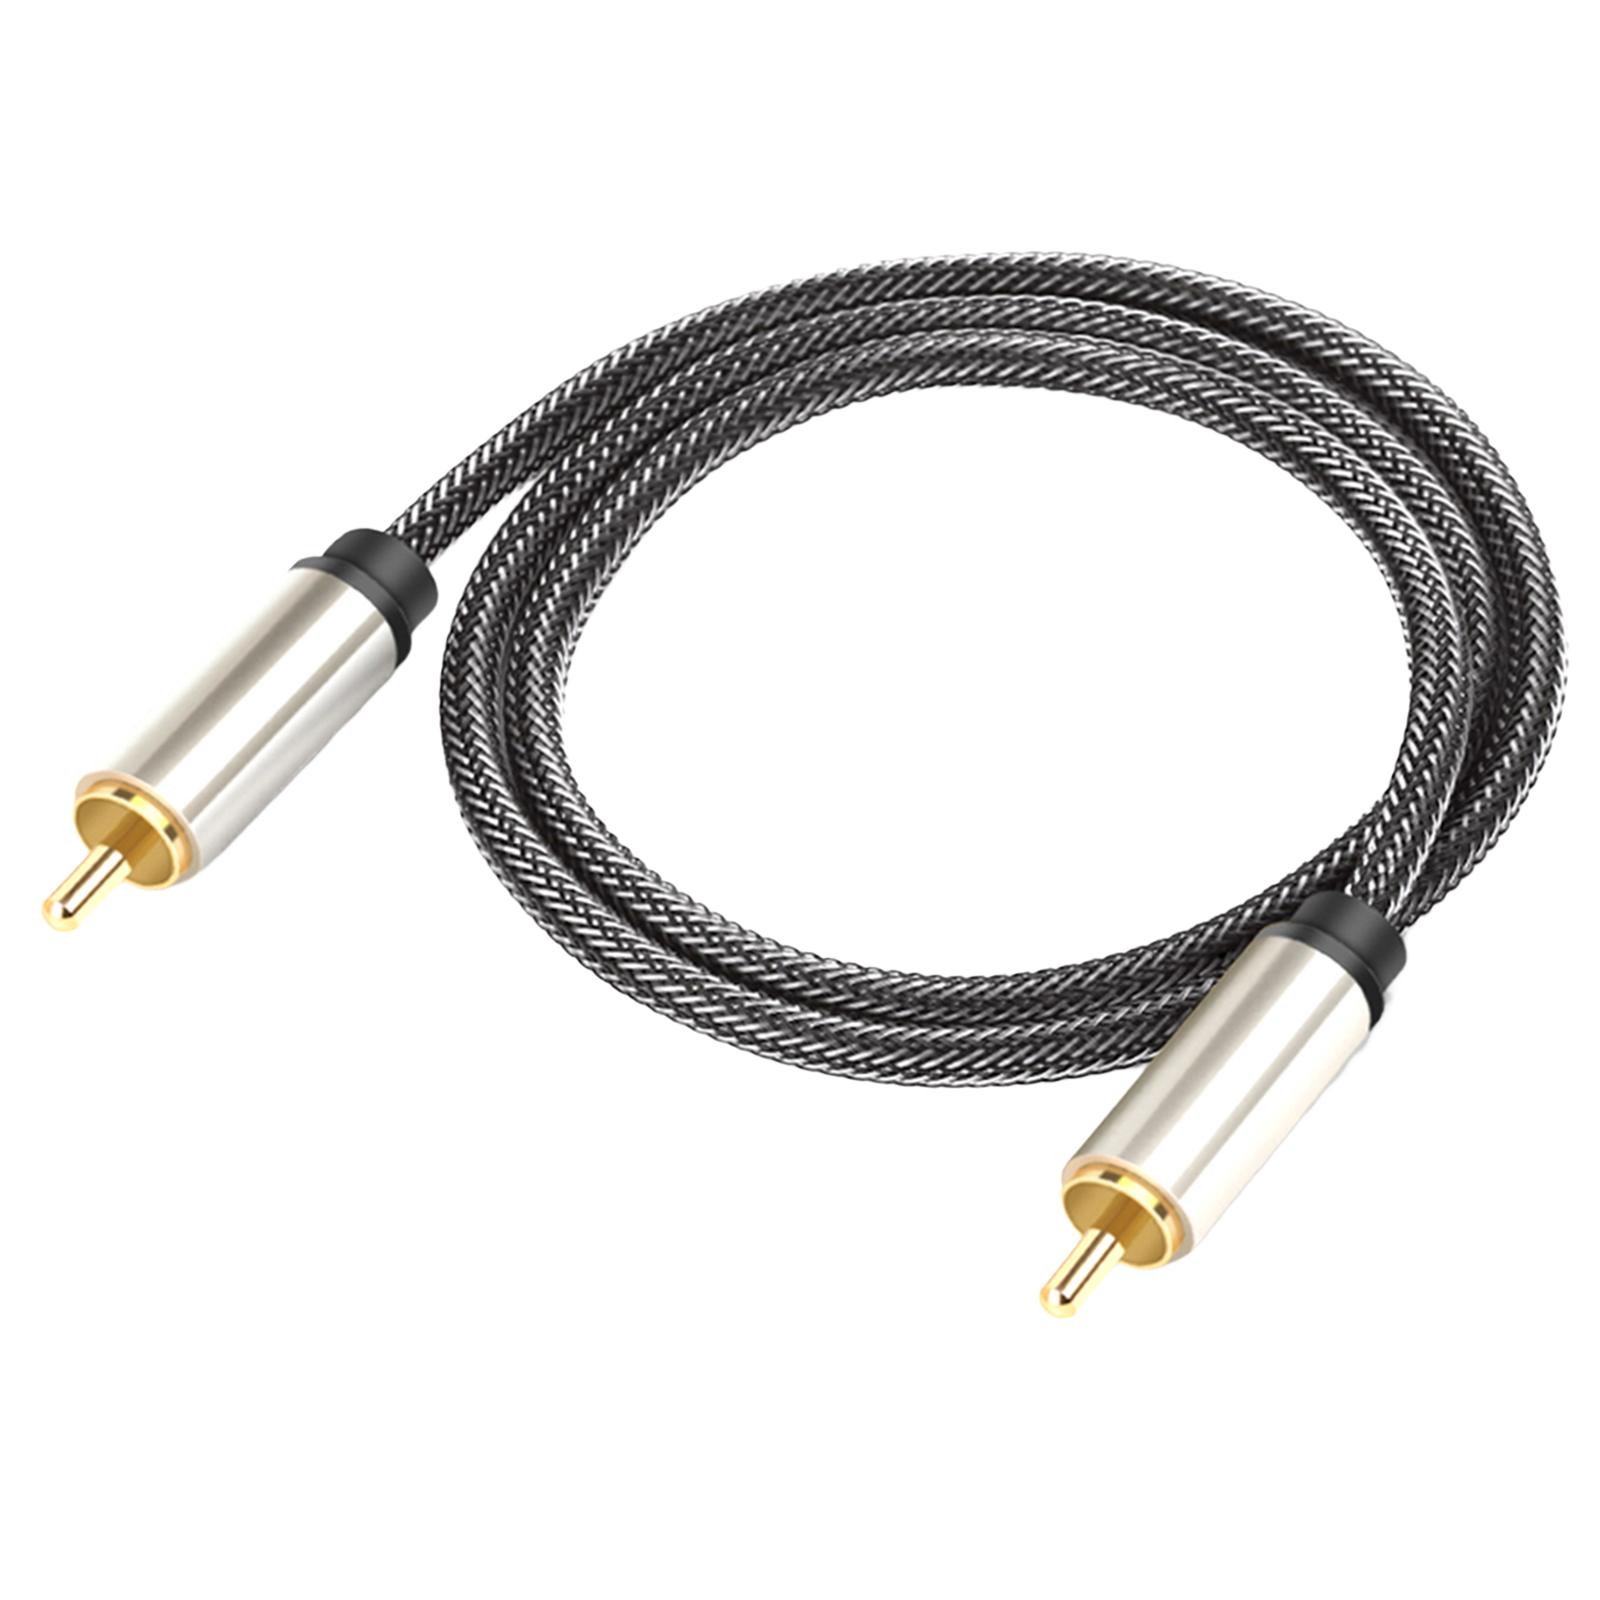 Coaxial Digital Audio Cable/ 1 Male to 1 Male RCA Stereo Cable HiFi 5.1 SPDIF Connector/ for Soundbar Home Theater HDTV Speaker , 1.5m - image 2 of 3